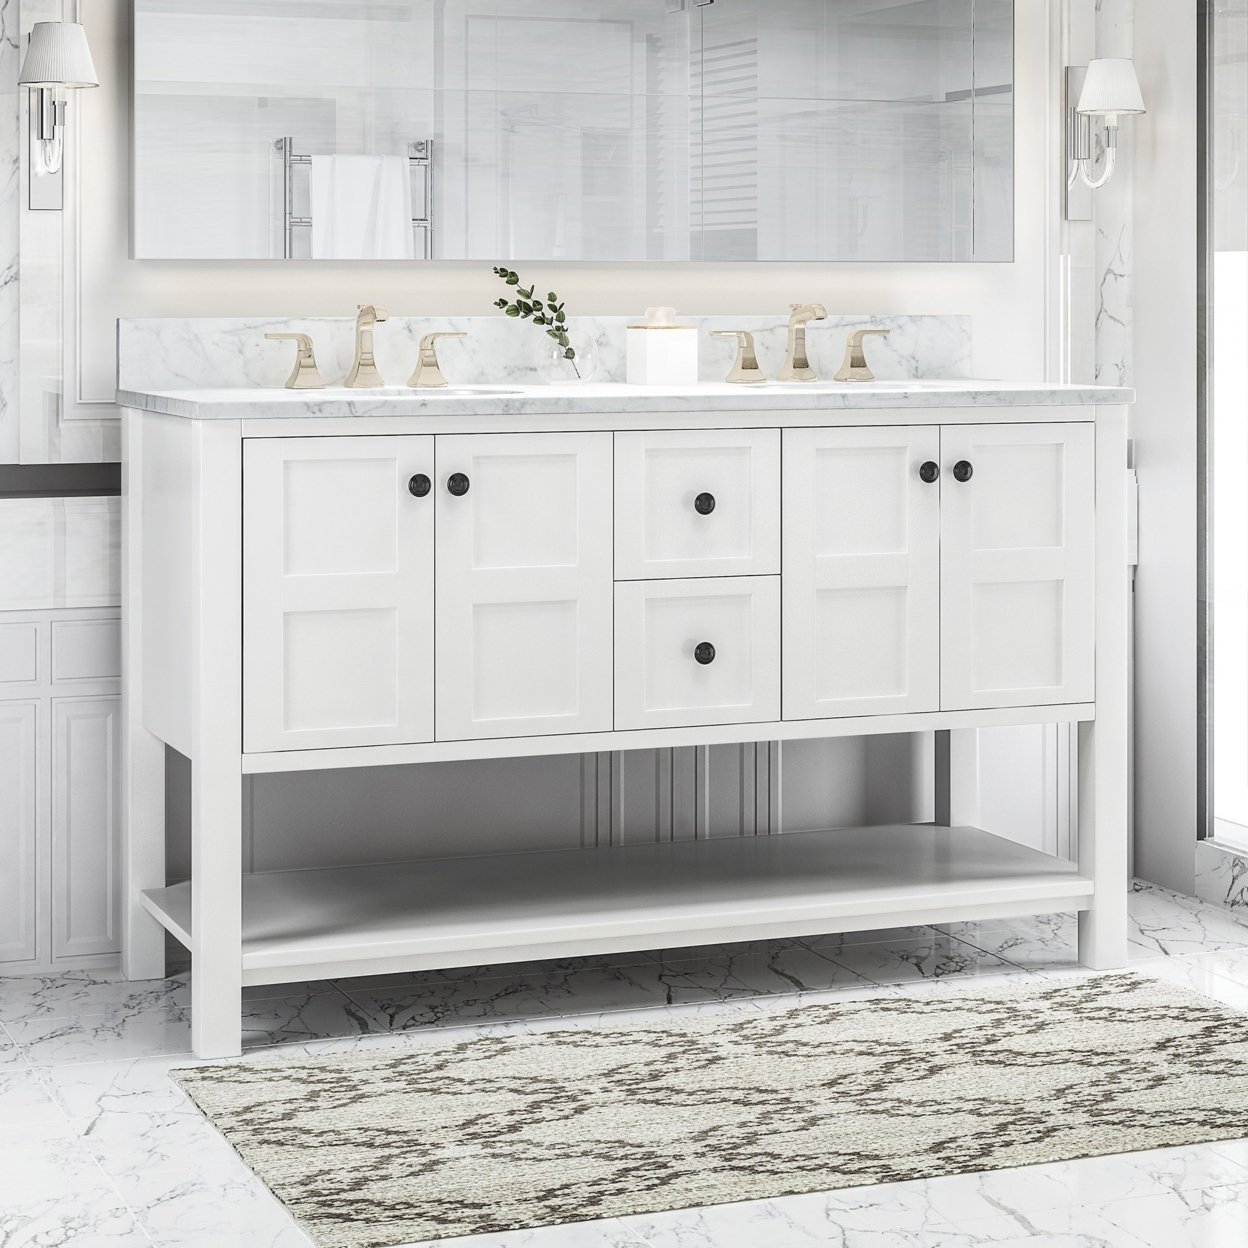 Jamison Contemporary 60 Wood Bathroom Vanity (Counter Top Not Included) - White